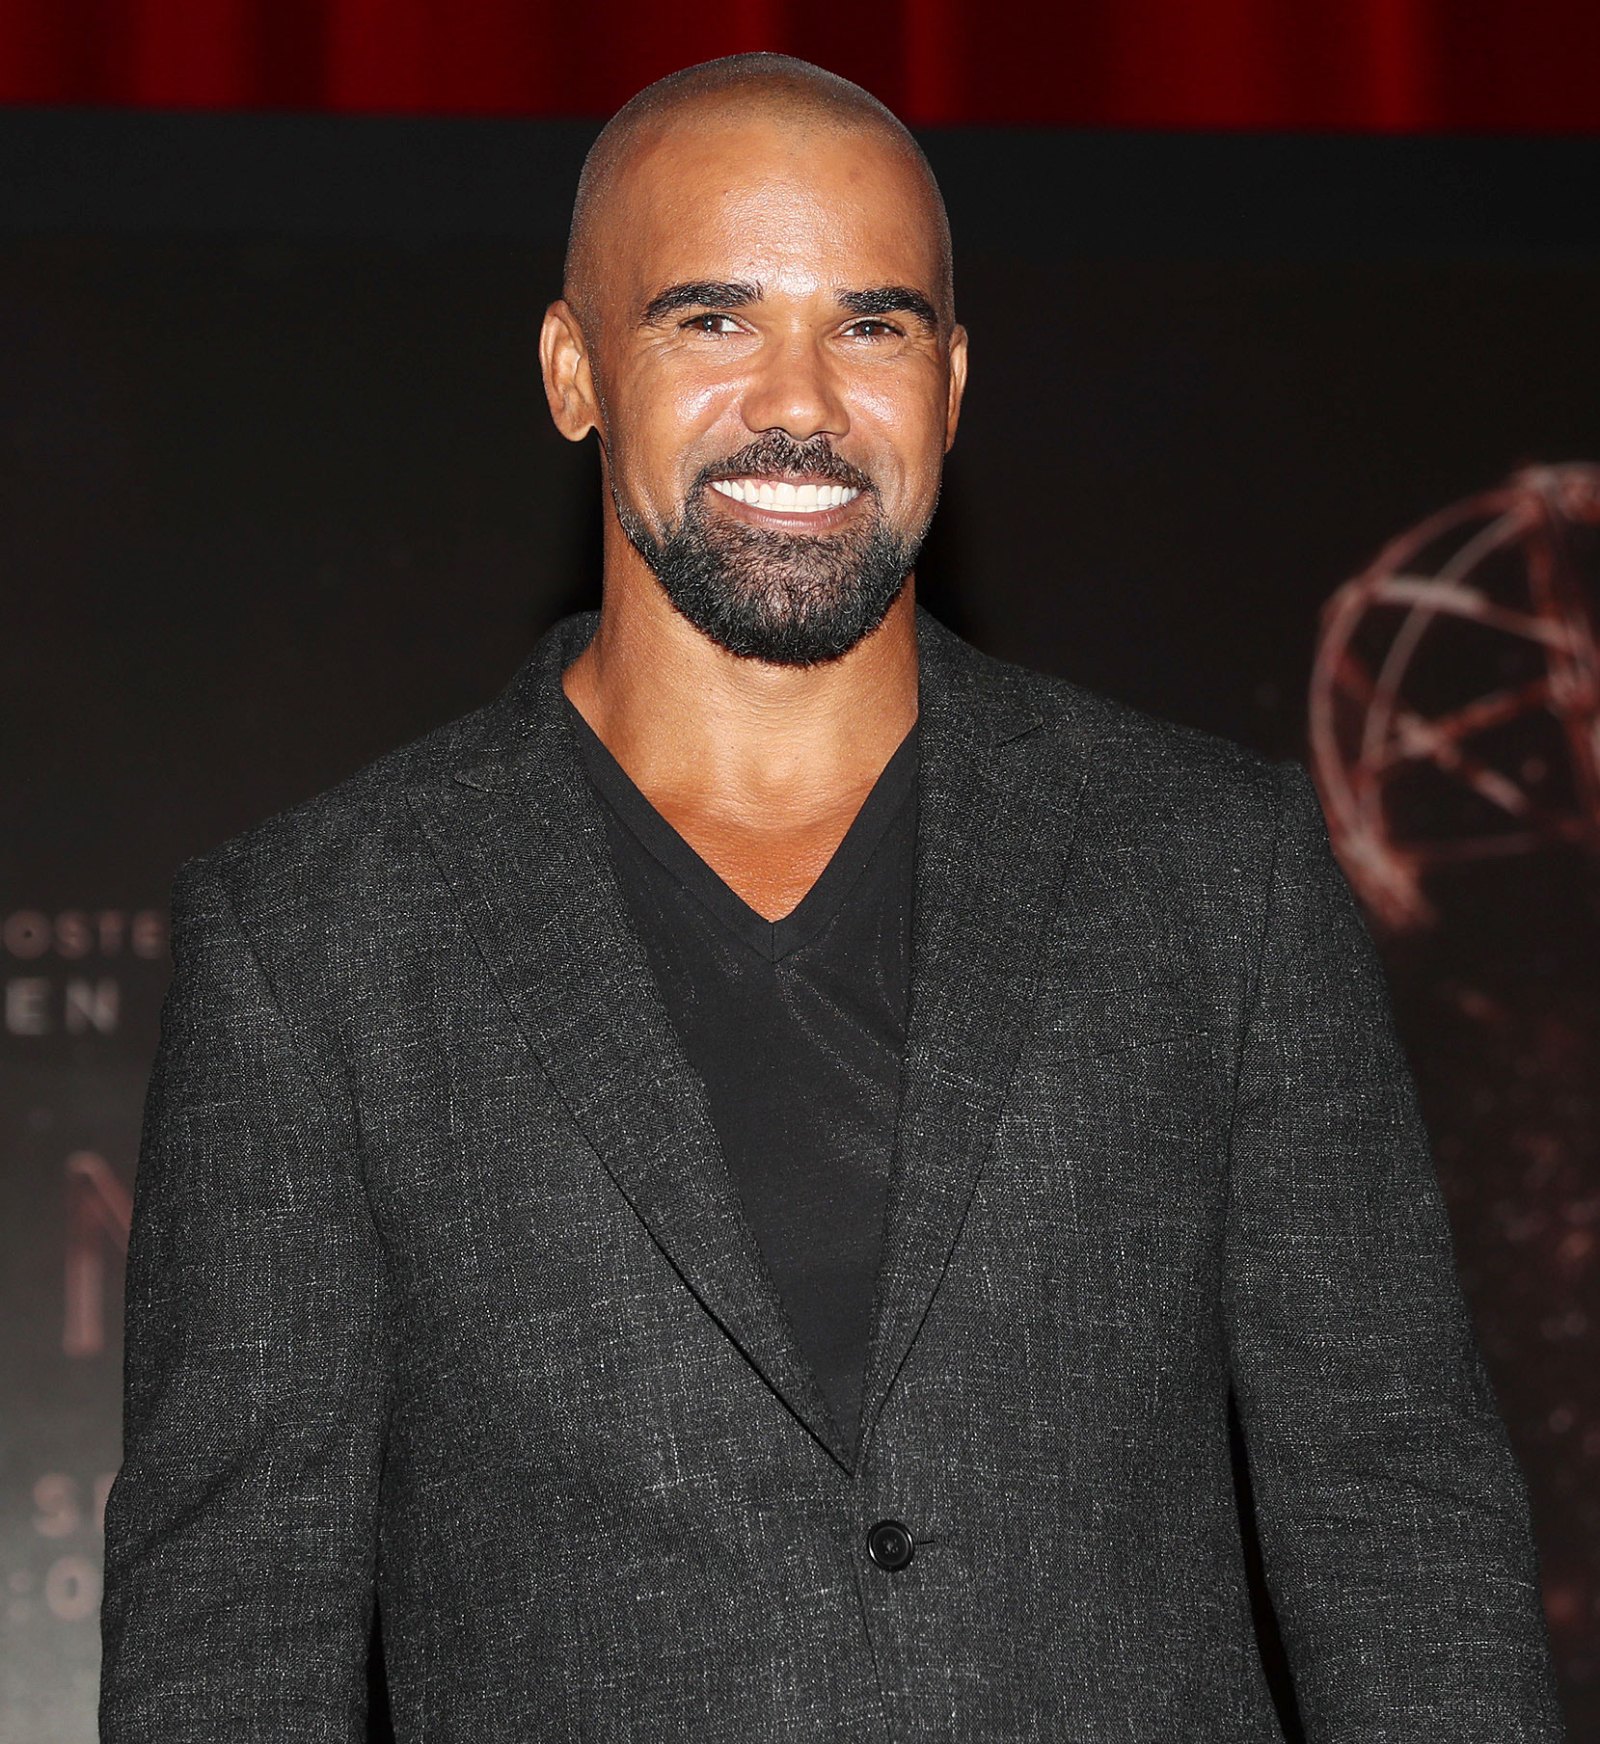 Shemar Moore Stars Whove Tested Positive COVID-19